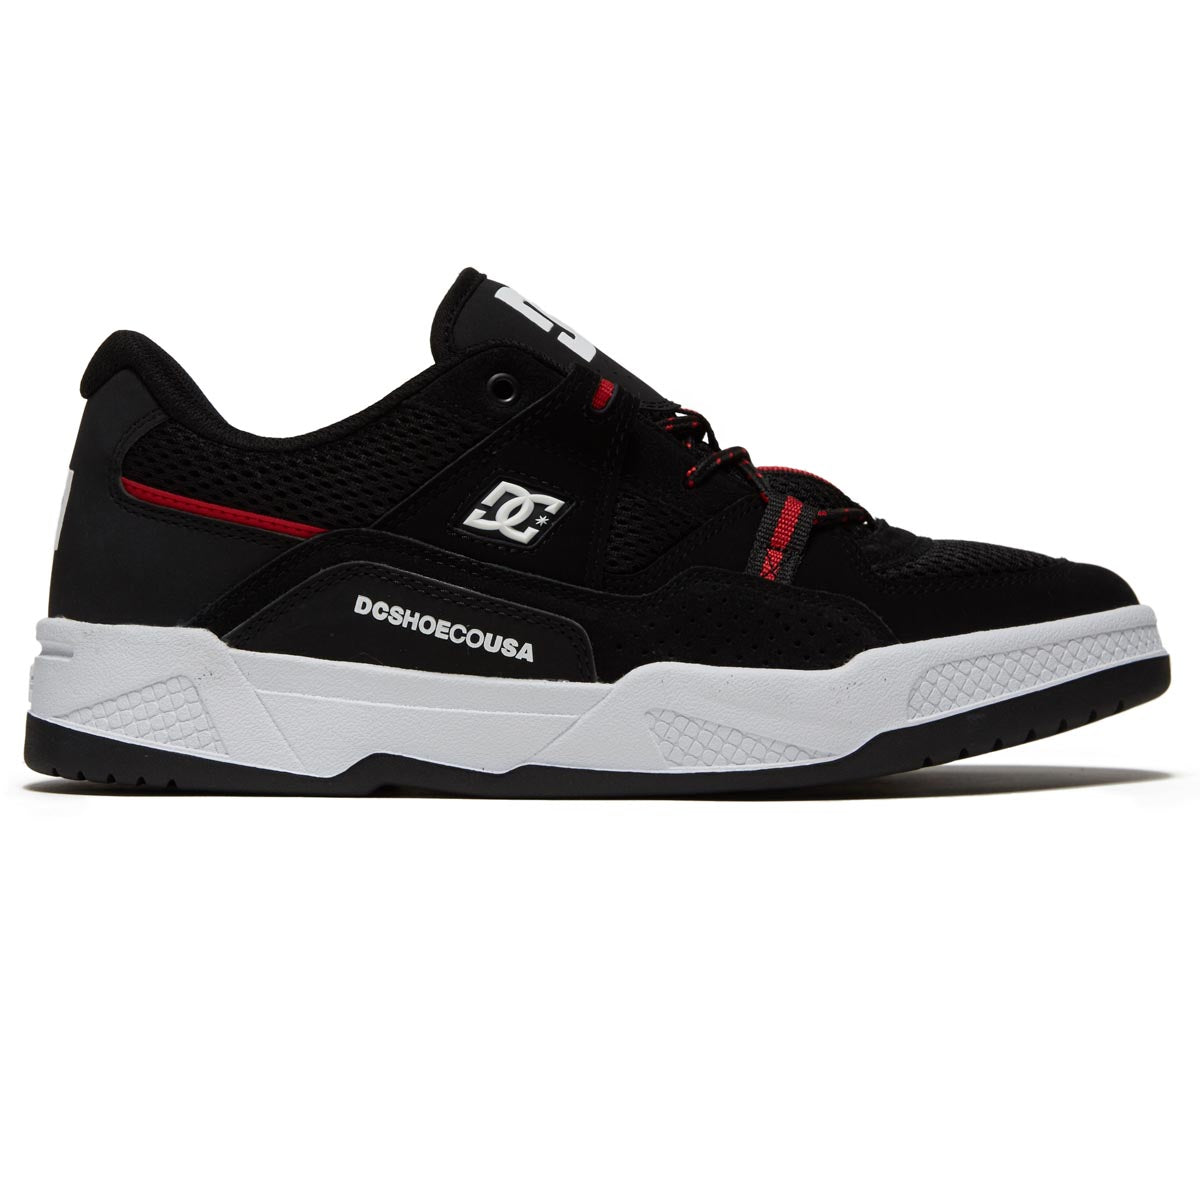 DC Construct Shoes - Black/Hot Coral image 1